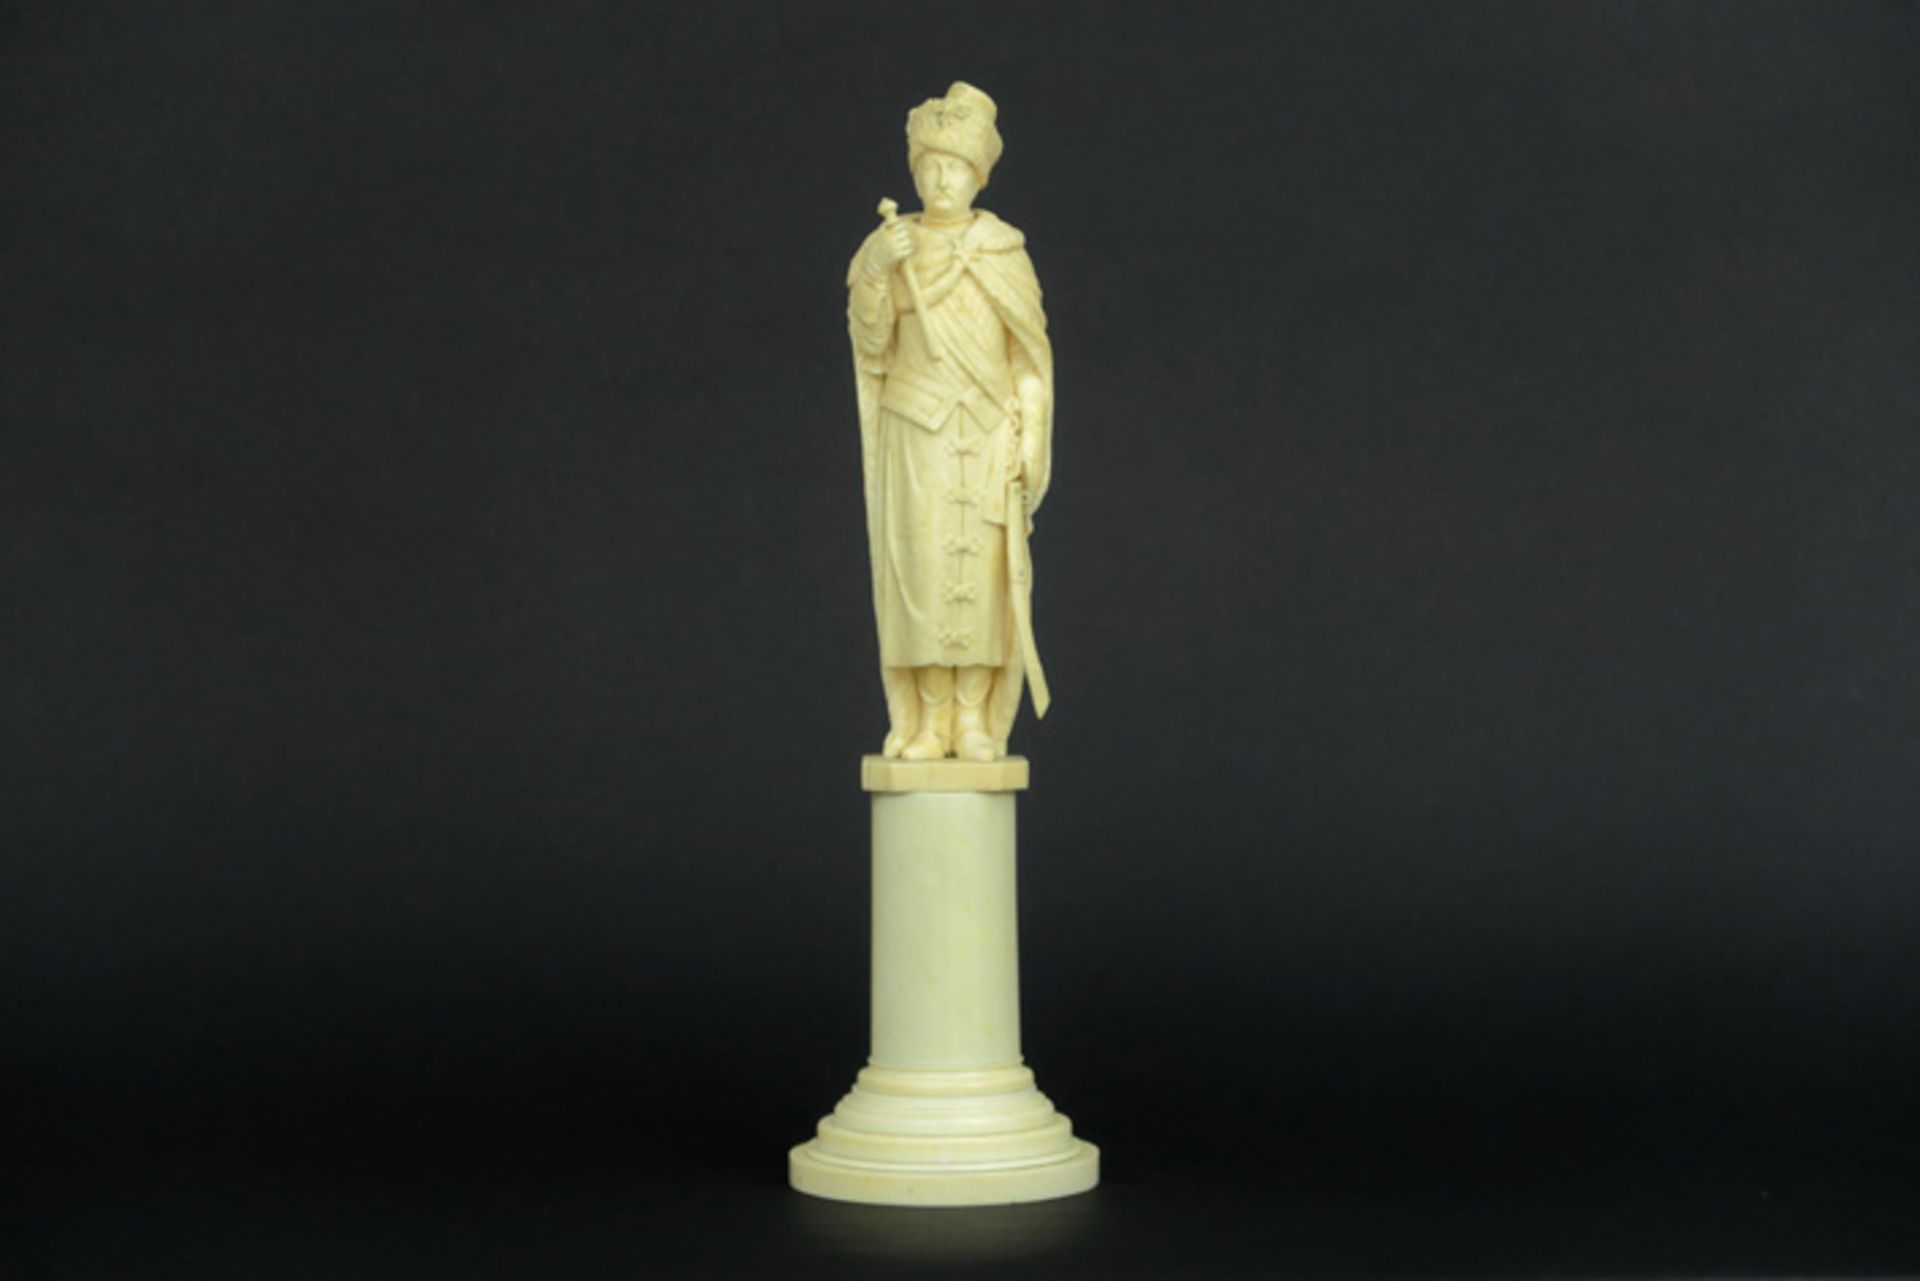 nice 19th Cent. east European "Russian (?) nobleman with his regalia" sculpture in ivory - with a